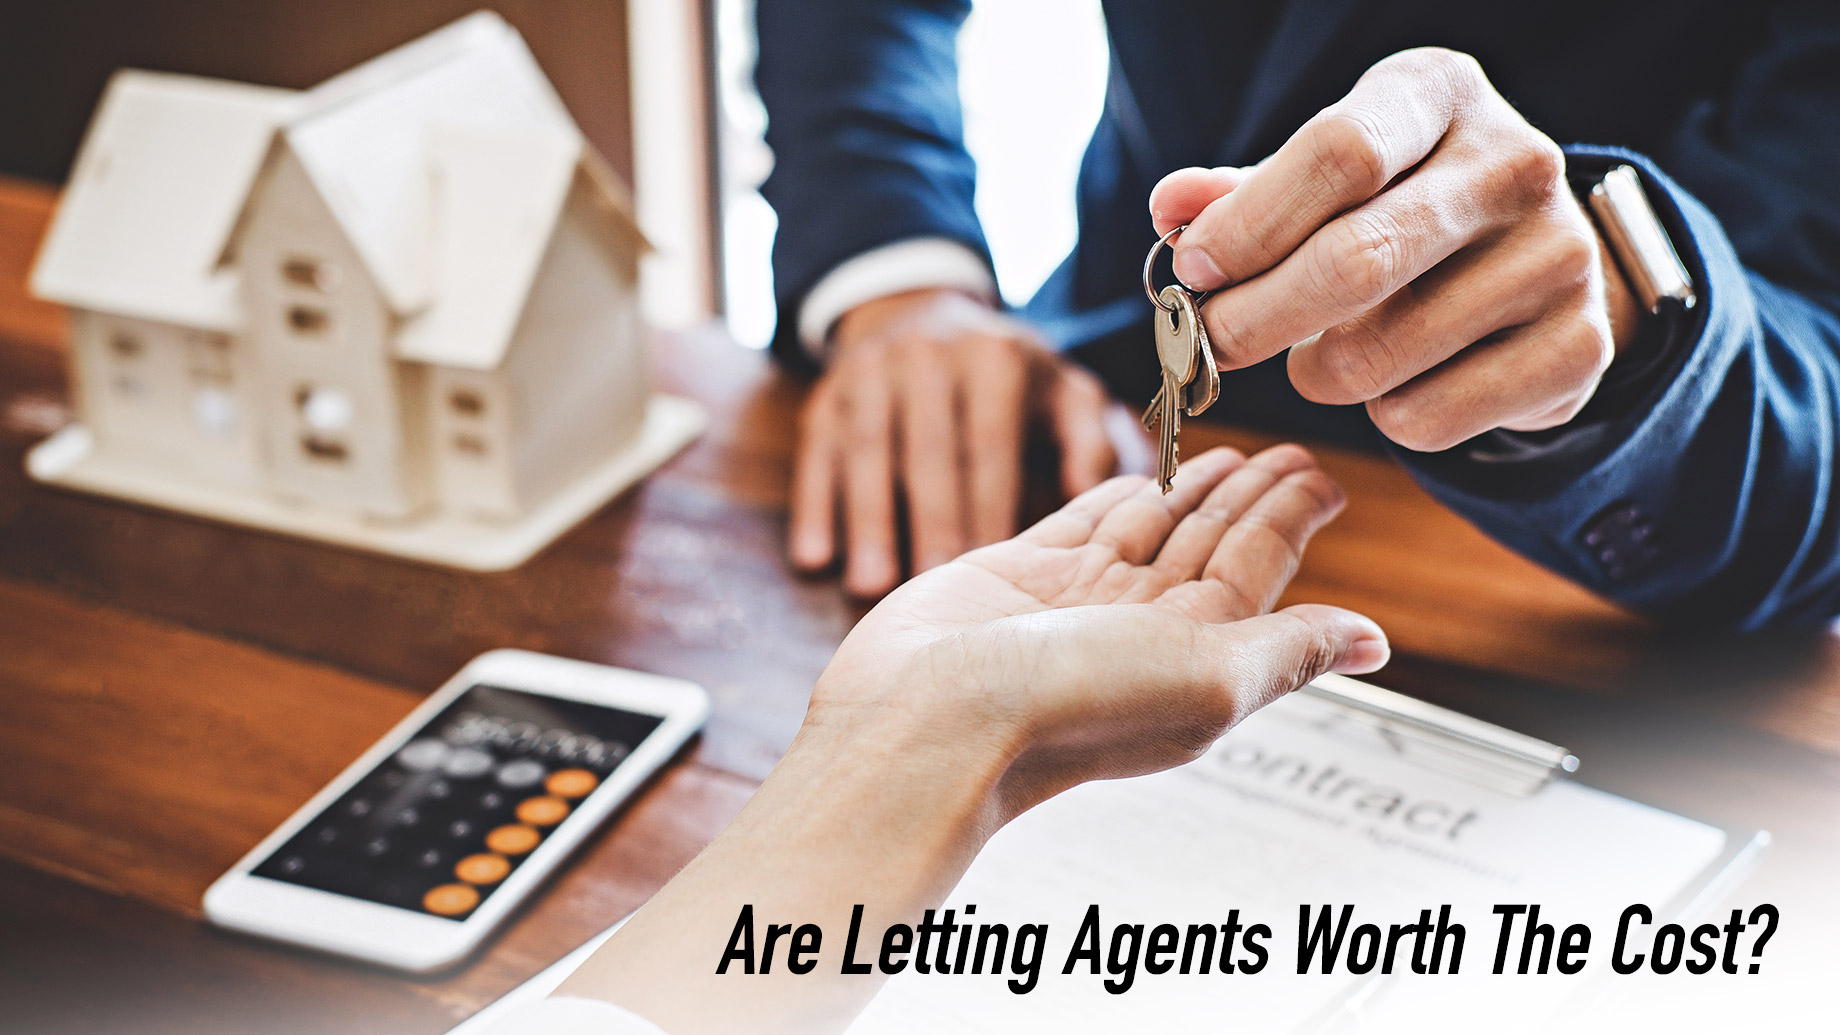 Are Letting Agents Worth The Cost?